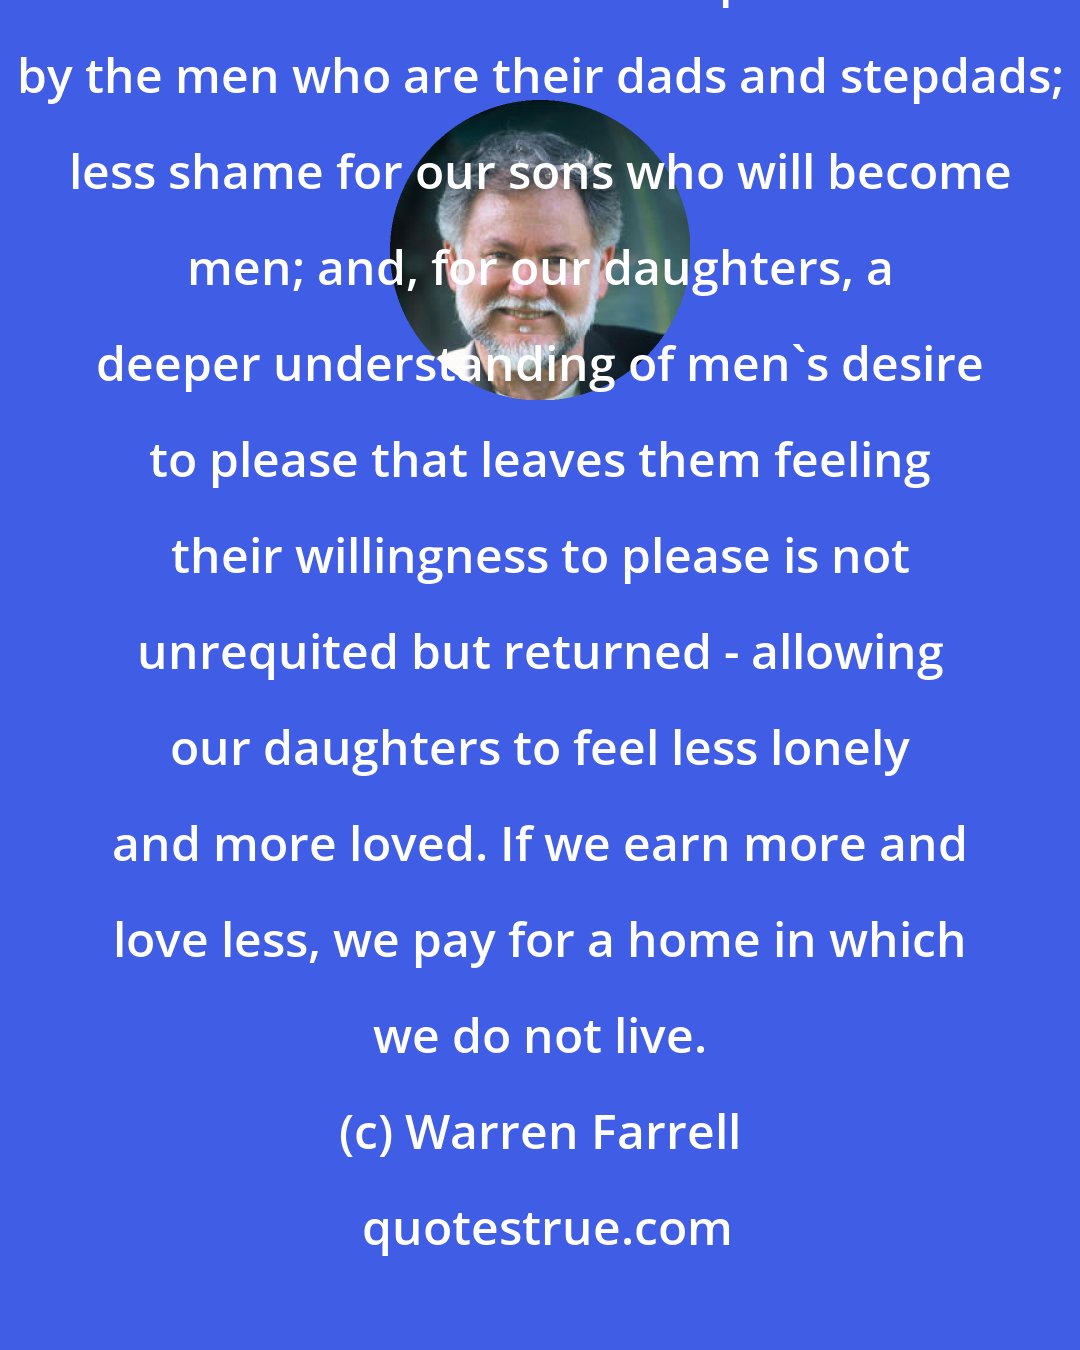 Warren Farrell: The deeper purpose of a more positive attitude toward men is a better life for the children who are parented by the men who are their dads and stepdads; less shame for our sons who will become men; and, for our daughters, a deeper understanding of men's desire to please that leaves them feeling their willingness to please is not unrequited but returned - allowing our daughters to feel less lonely and more loved. If we earn more and love less, we pay for a home in which we do not live.